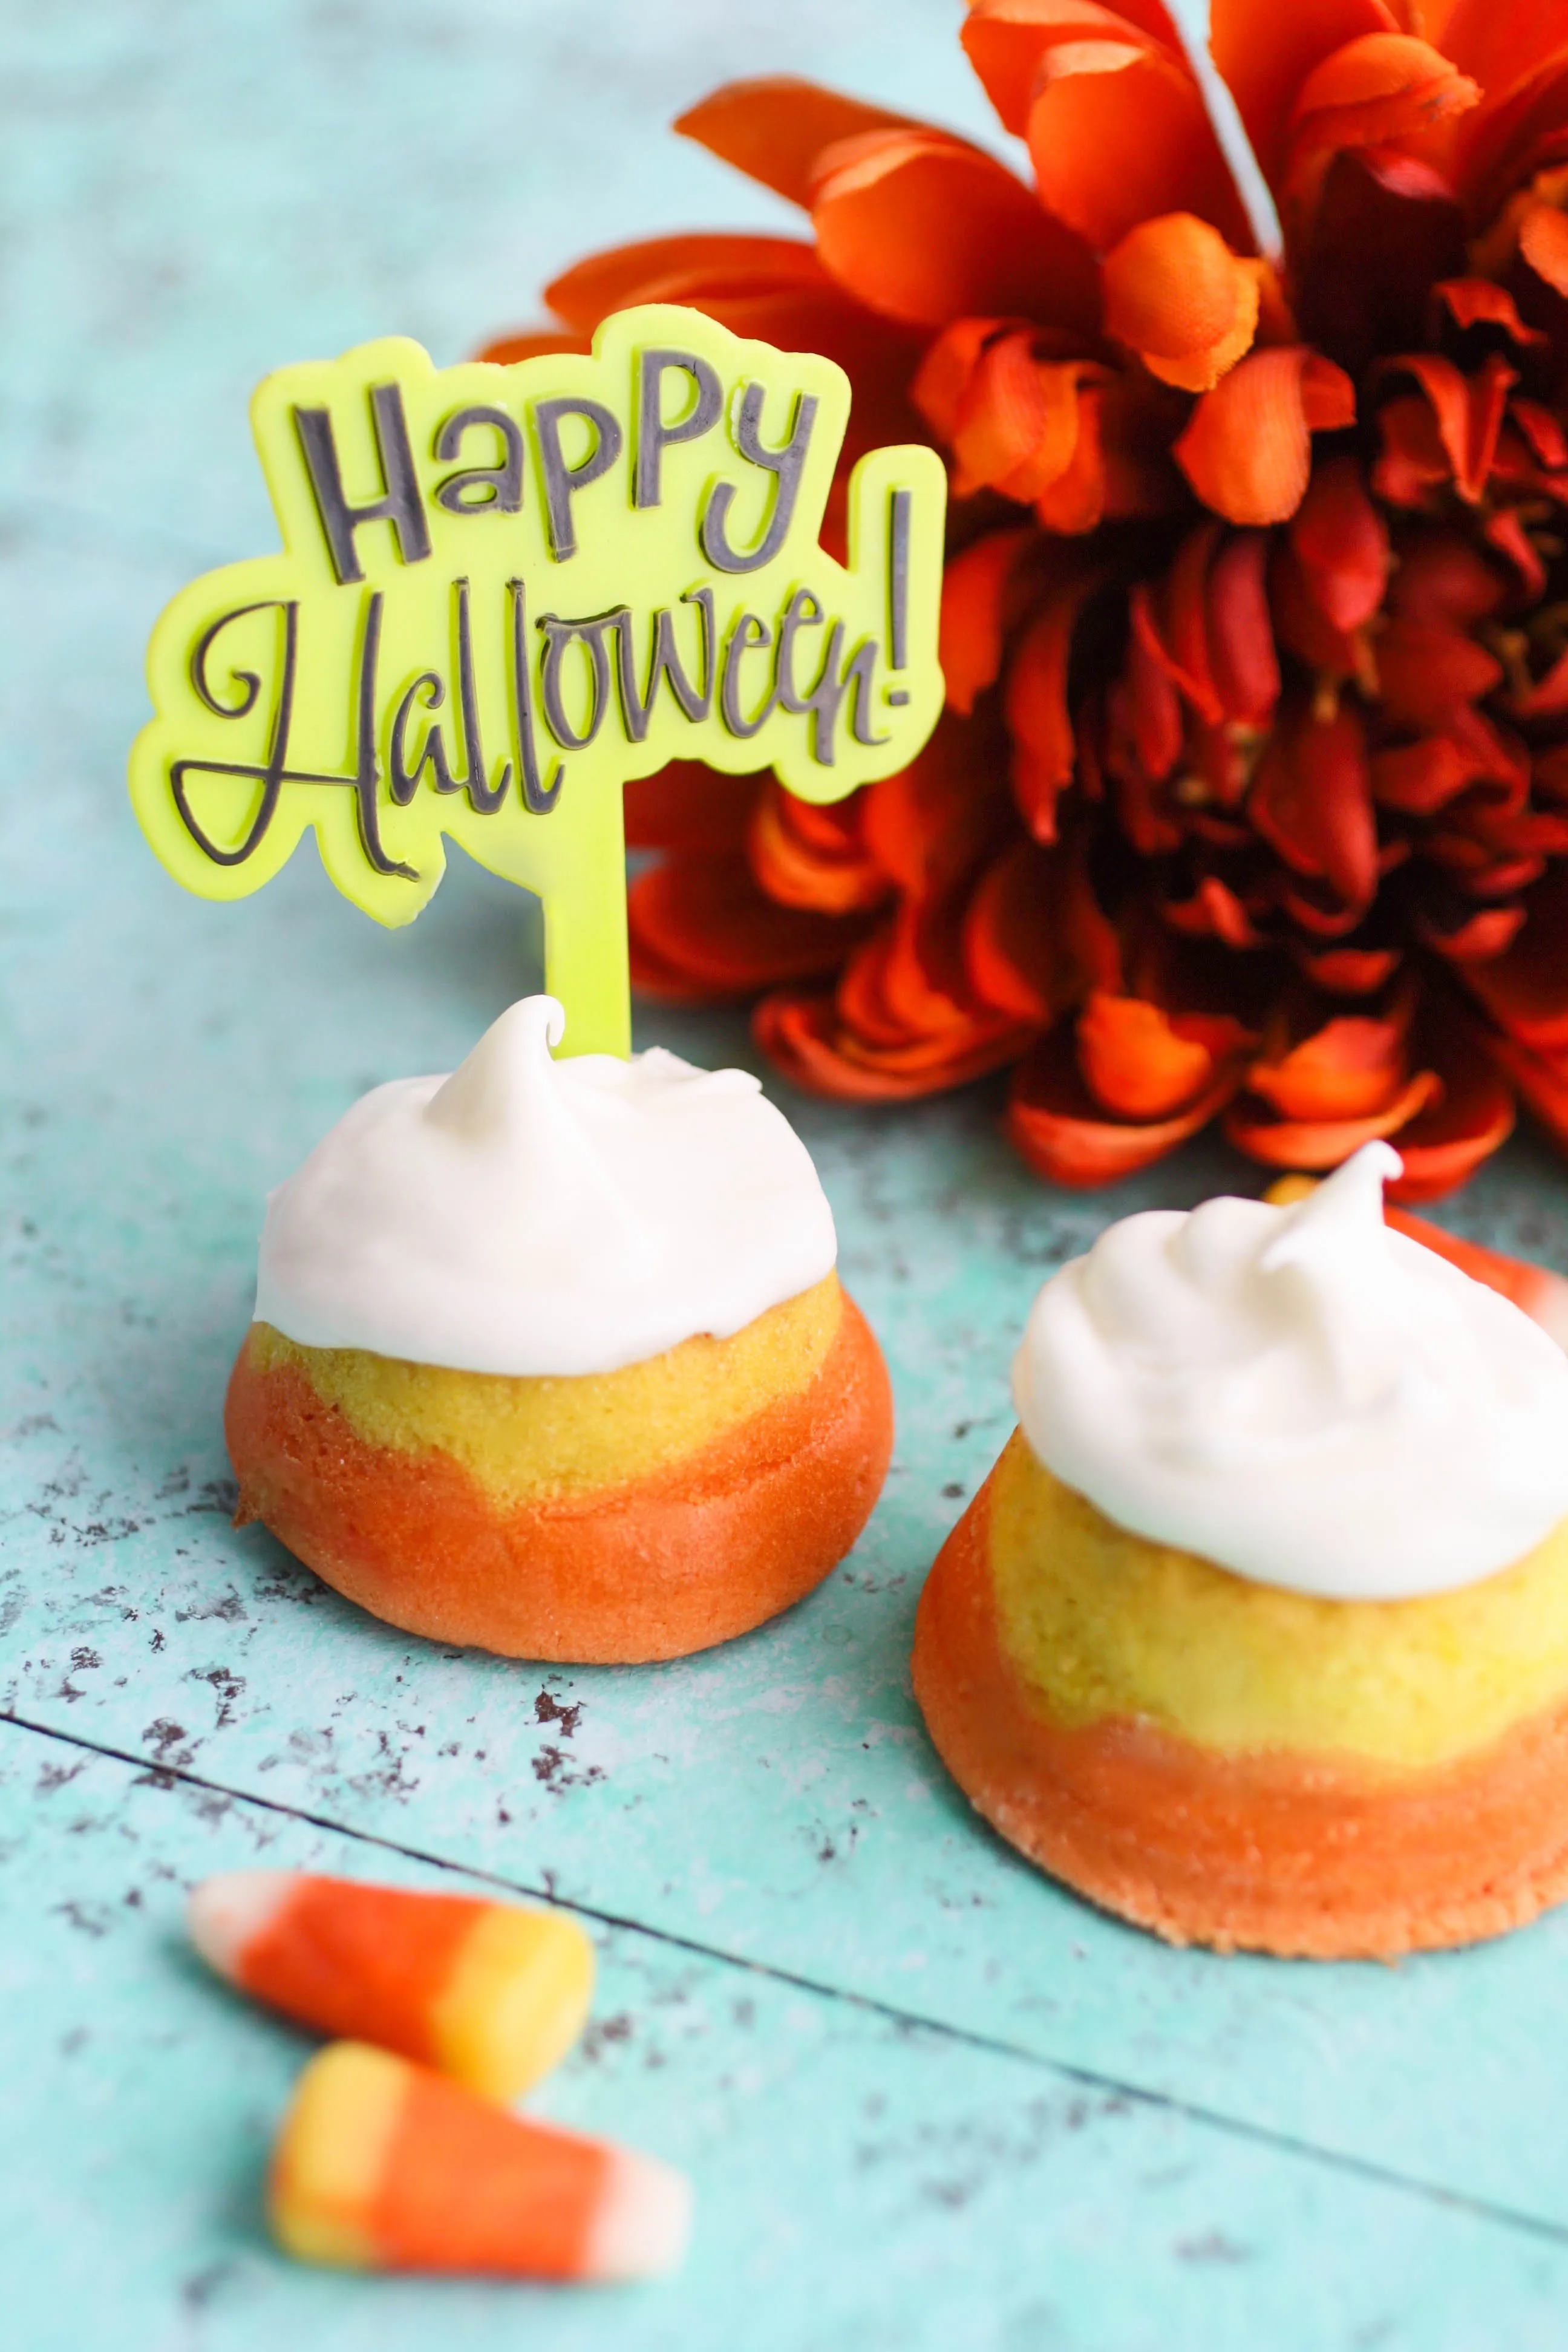 Mini “Candy Corn” Cupcakes with Buttercream Frosting are fun cupcakes for Halloween. You'll love these tasty, tiny cupcakes!